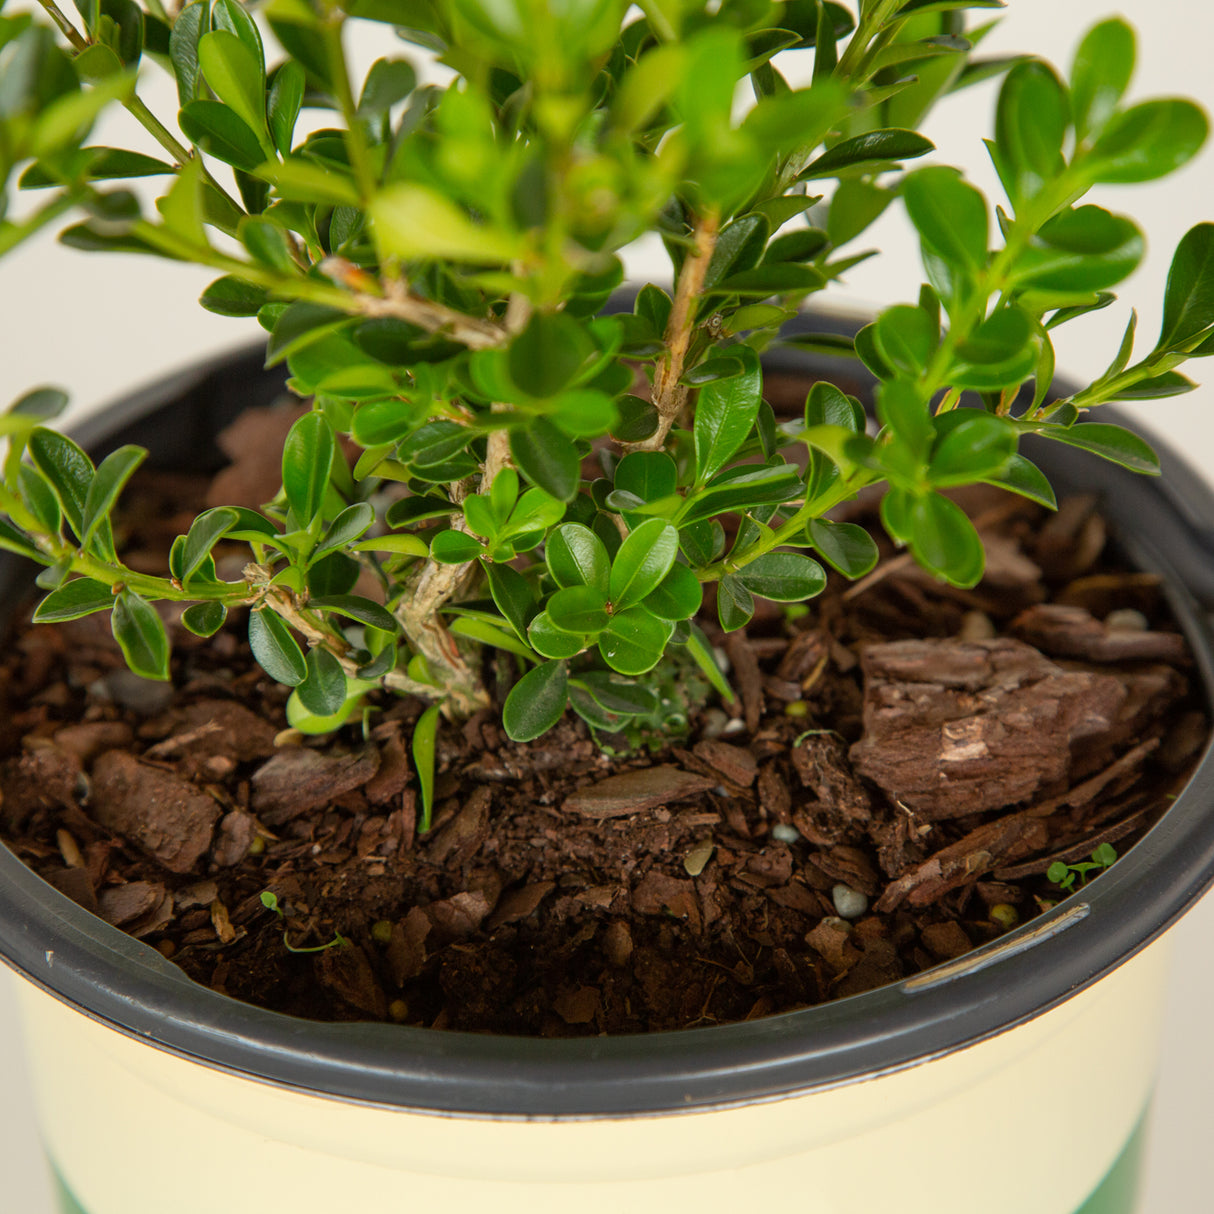 Renaissance Boxwood foliage closeup showing small, bright green leaves, woody stems emerging from soil in a nursery pot